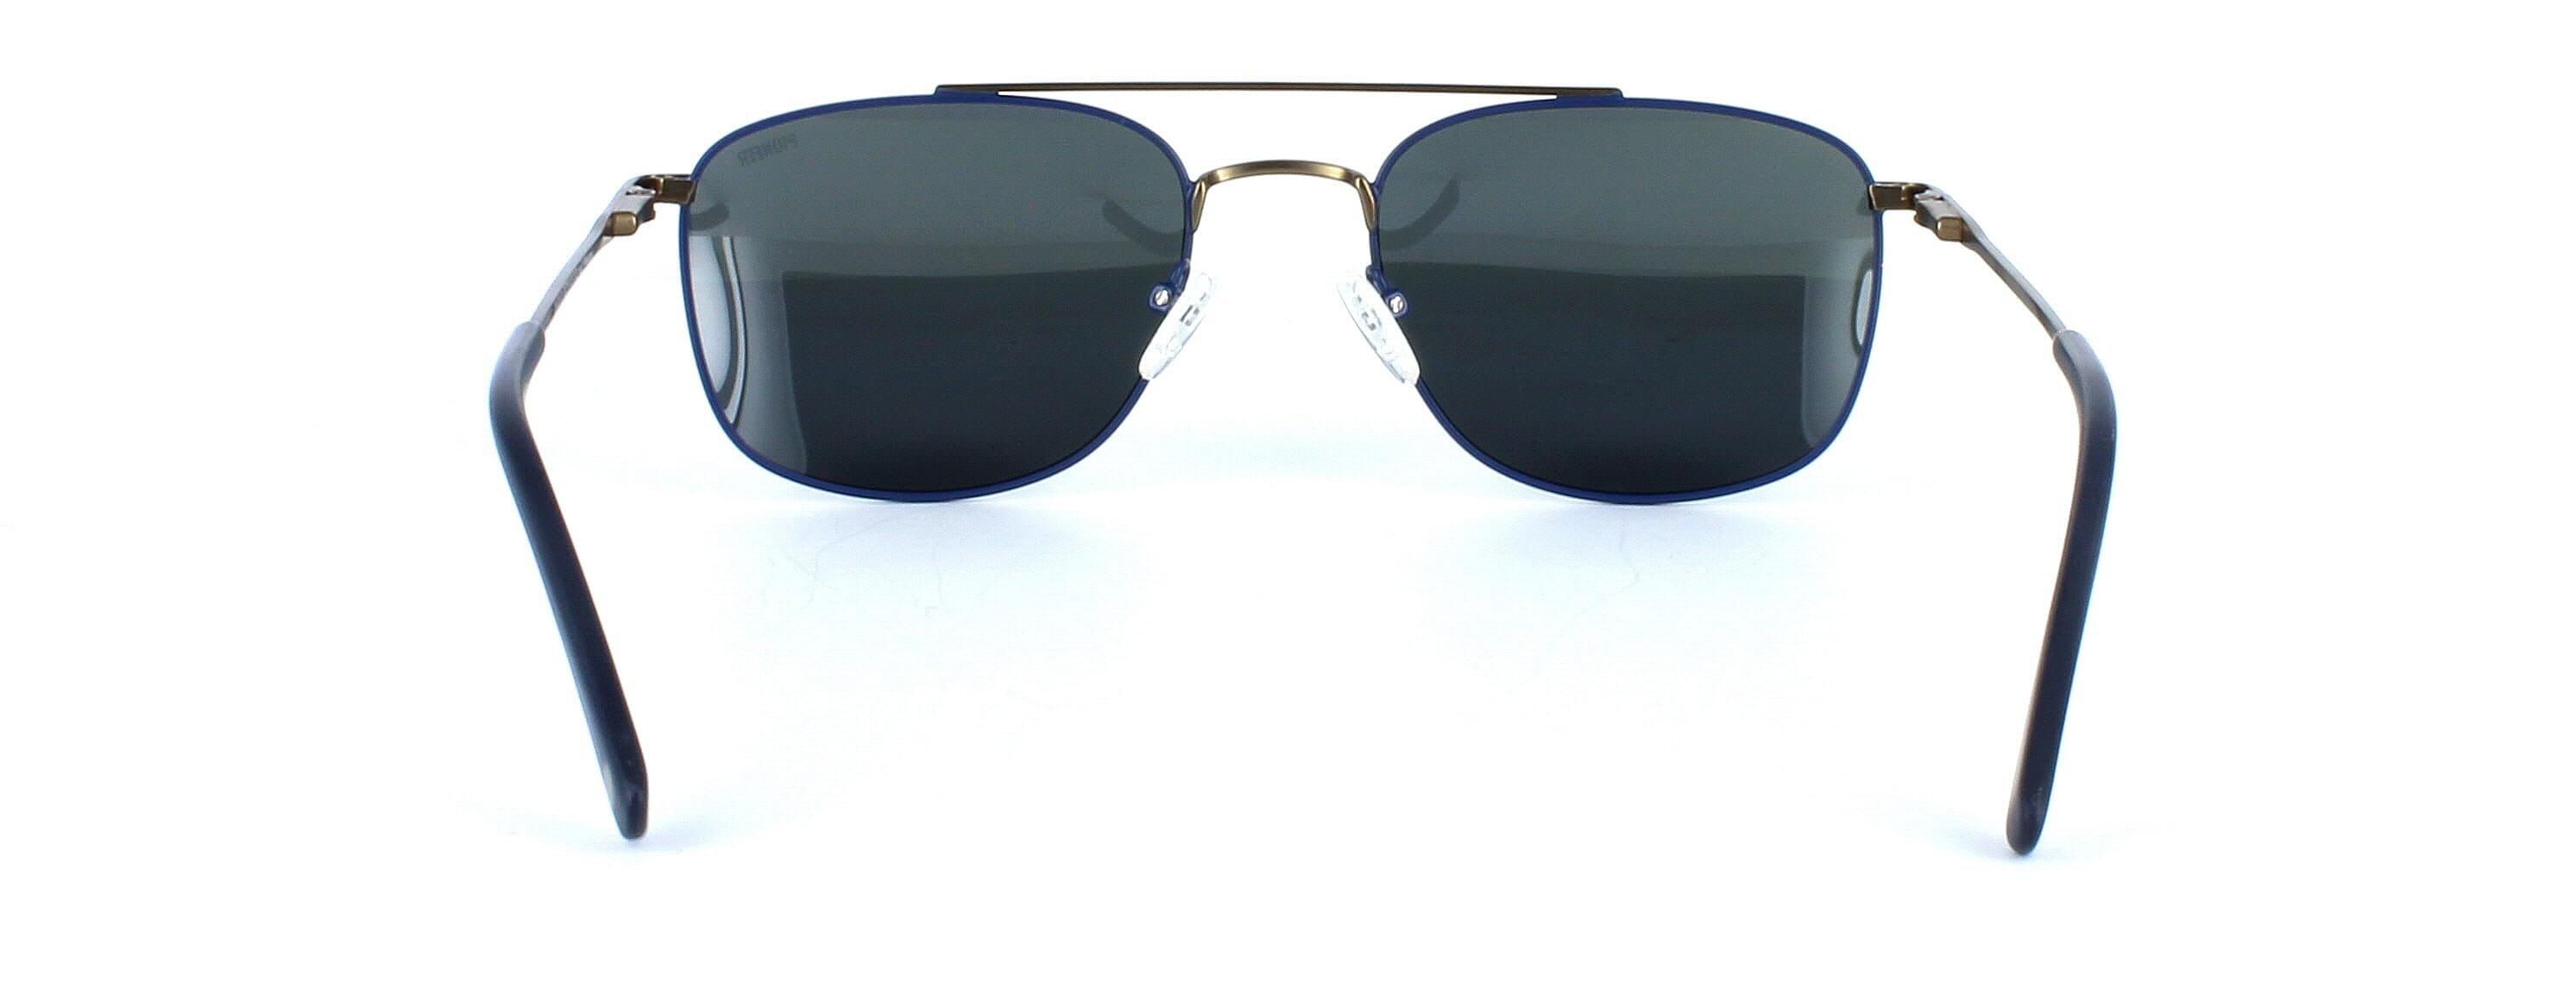 Carlo - Unisex 2-tone aviator style sunglasses here in blue and bronze - image view 1